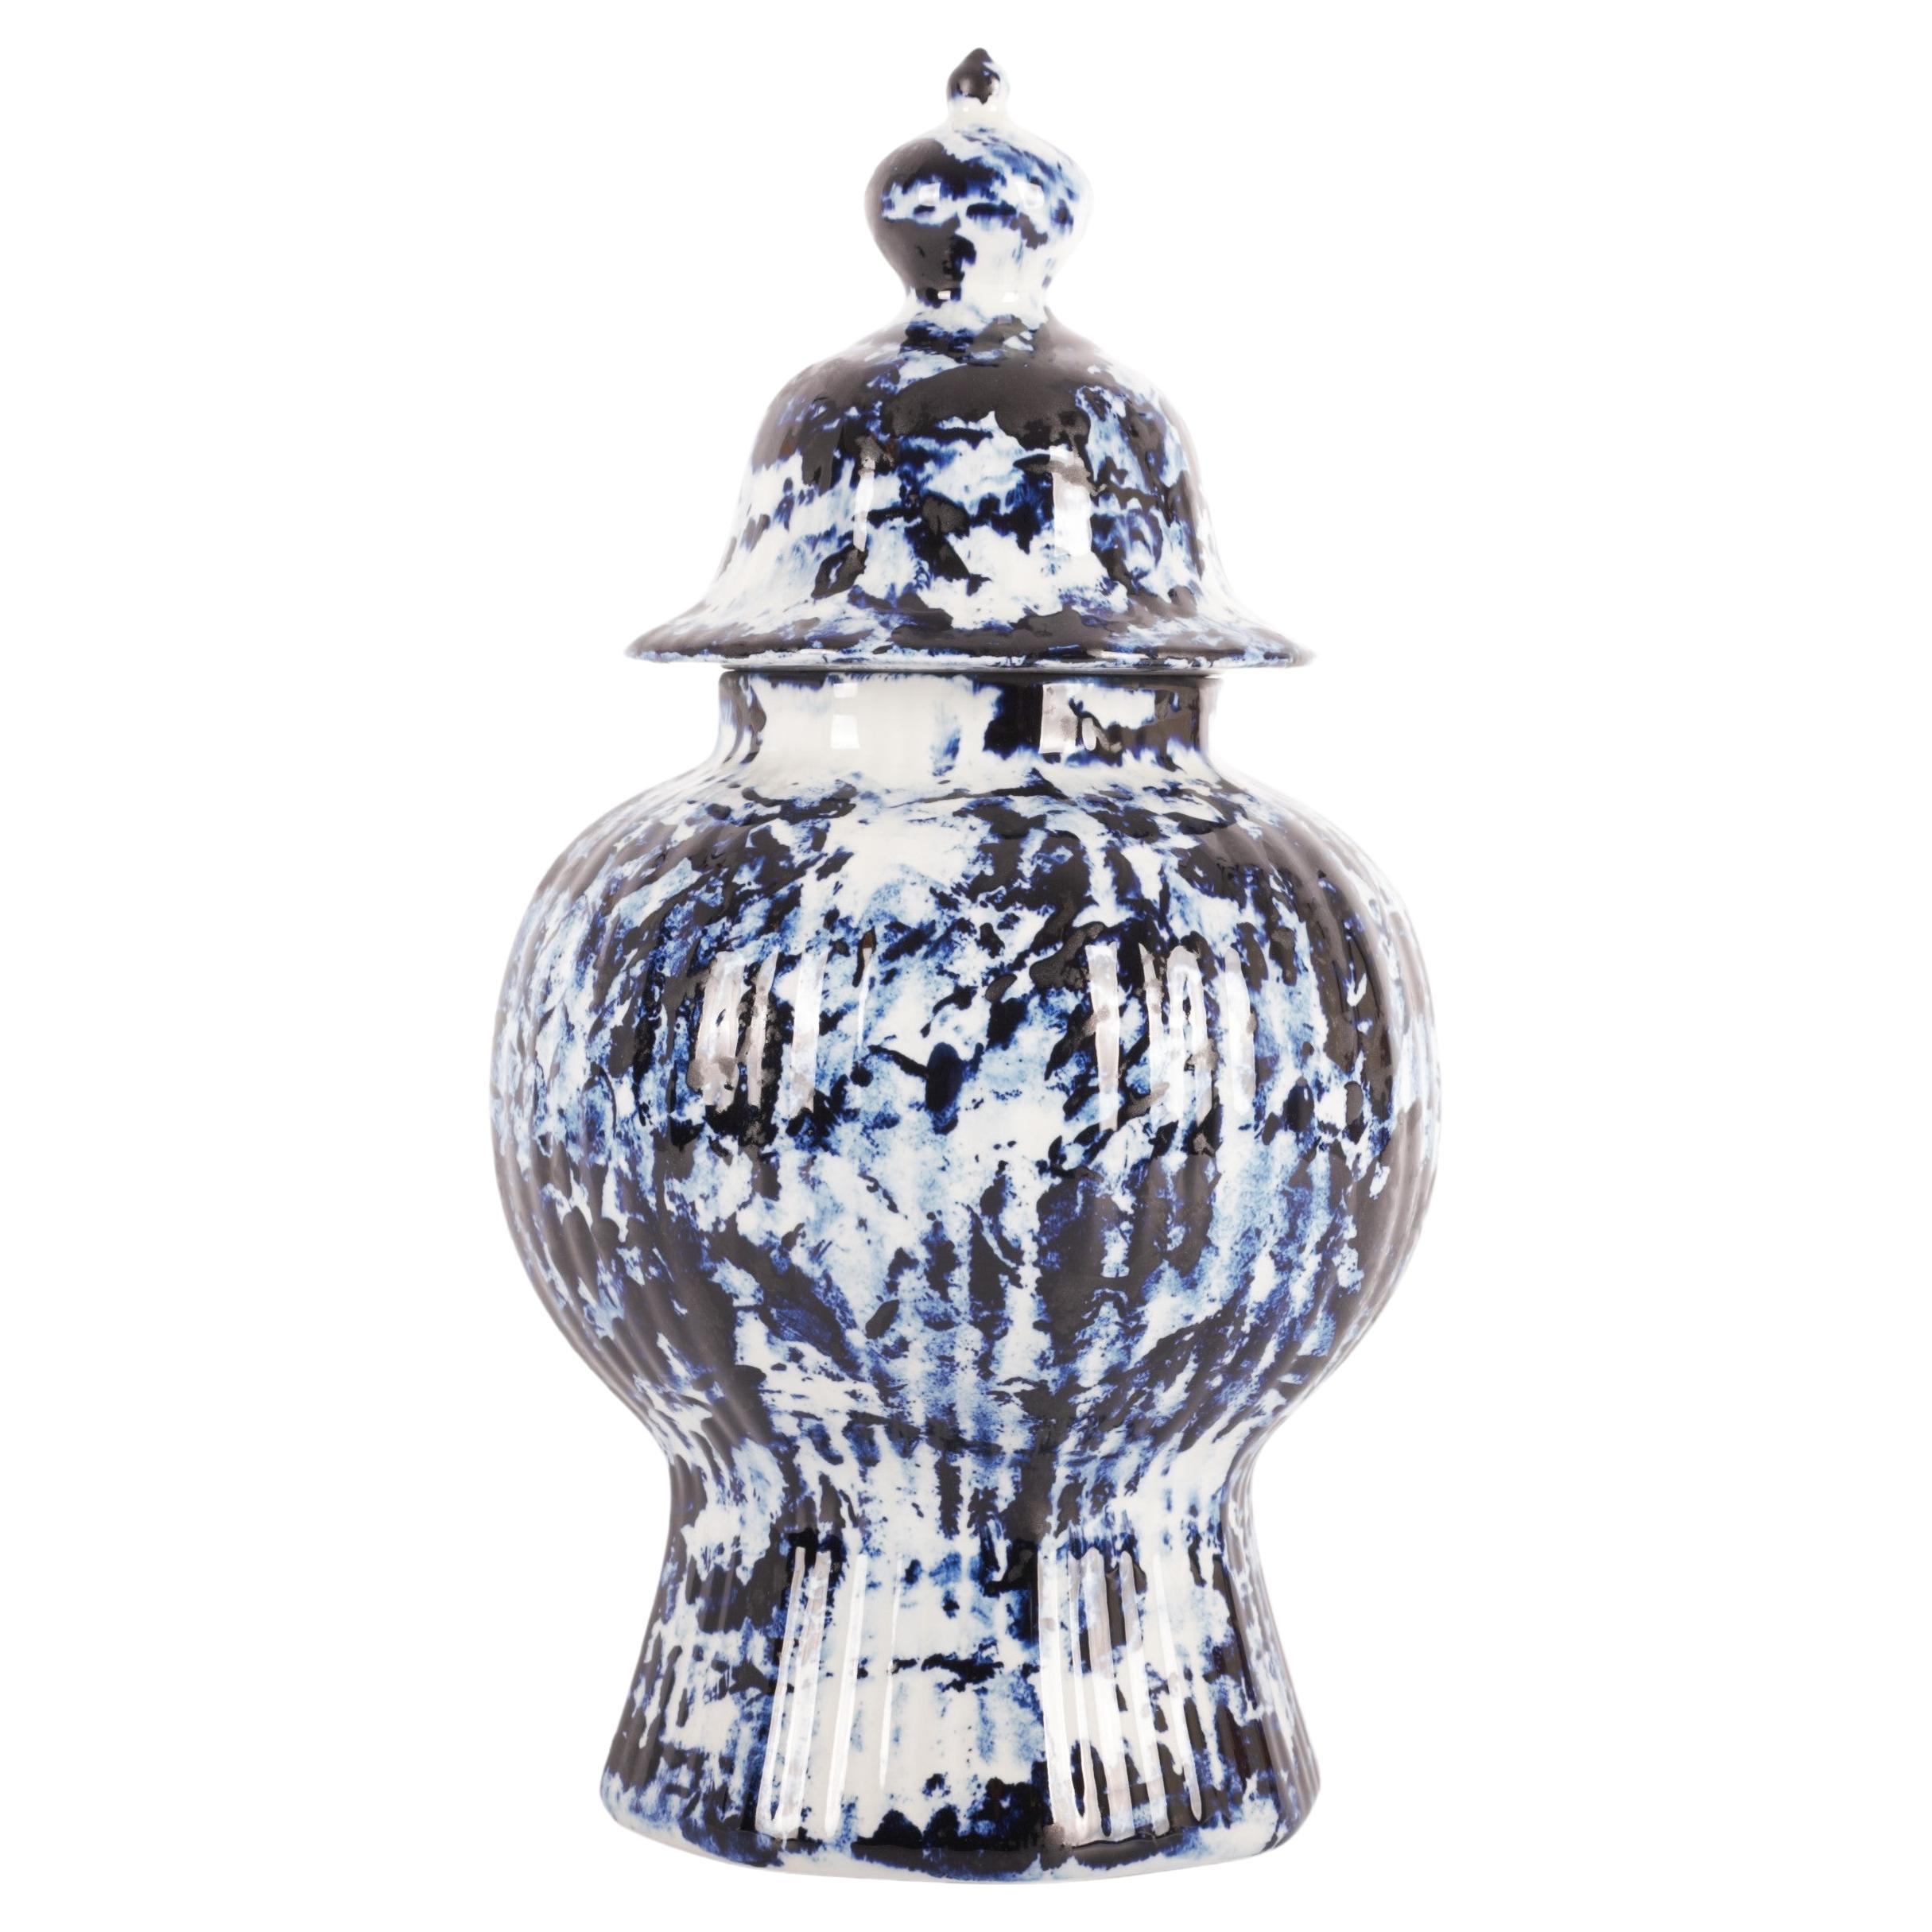 Delft Blue Vase with Lid 37cm #2, by Marcel Wanders, Hand Painted, 2006, Unique